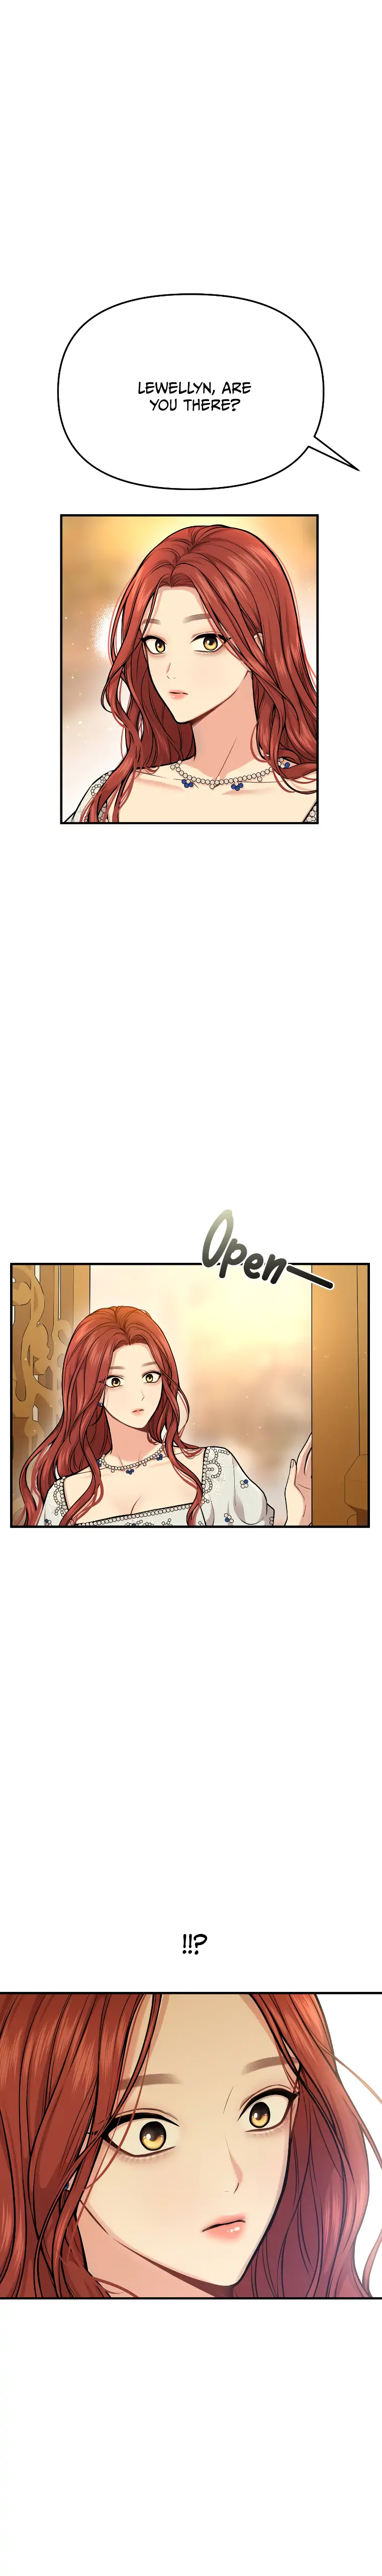 The Secret Bedroom of a Dejected Royal Daughter chapter 17